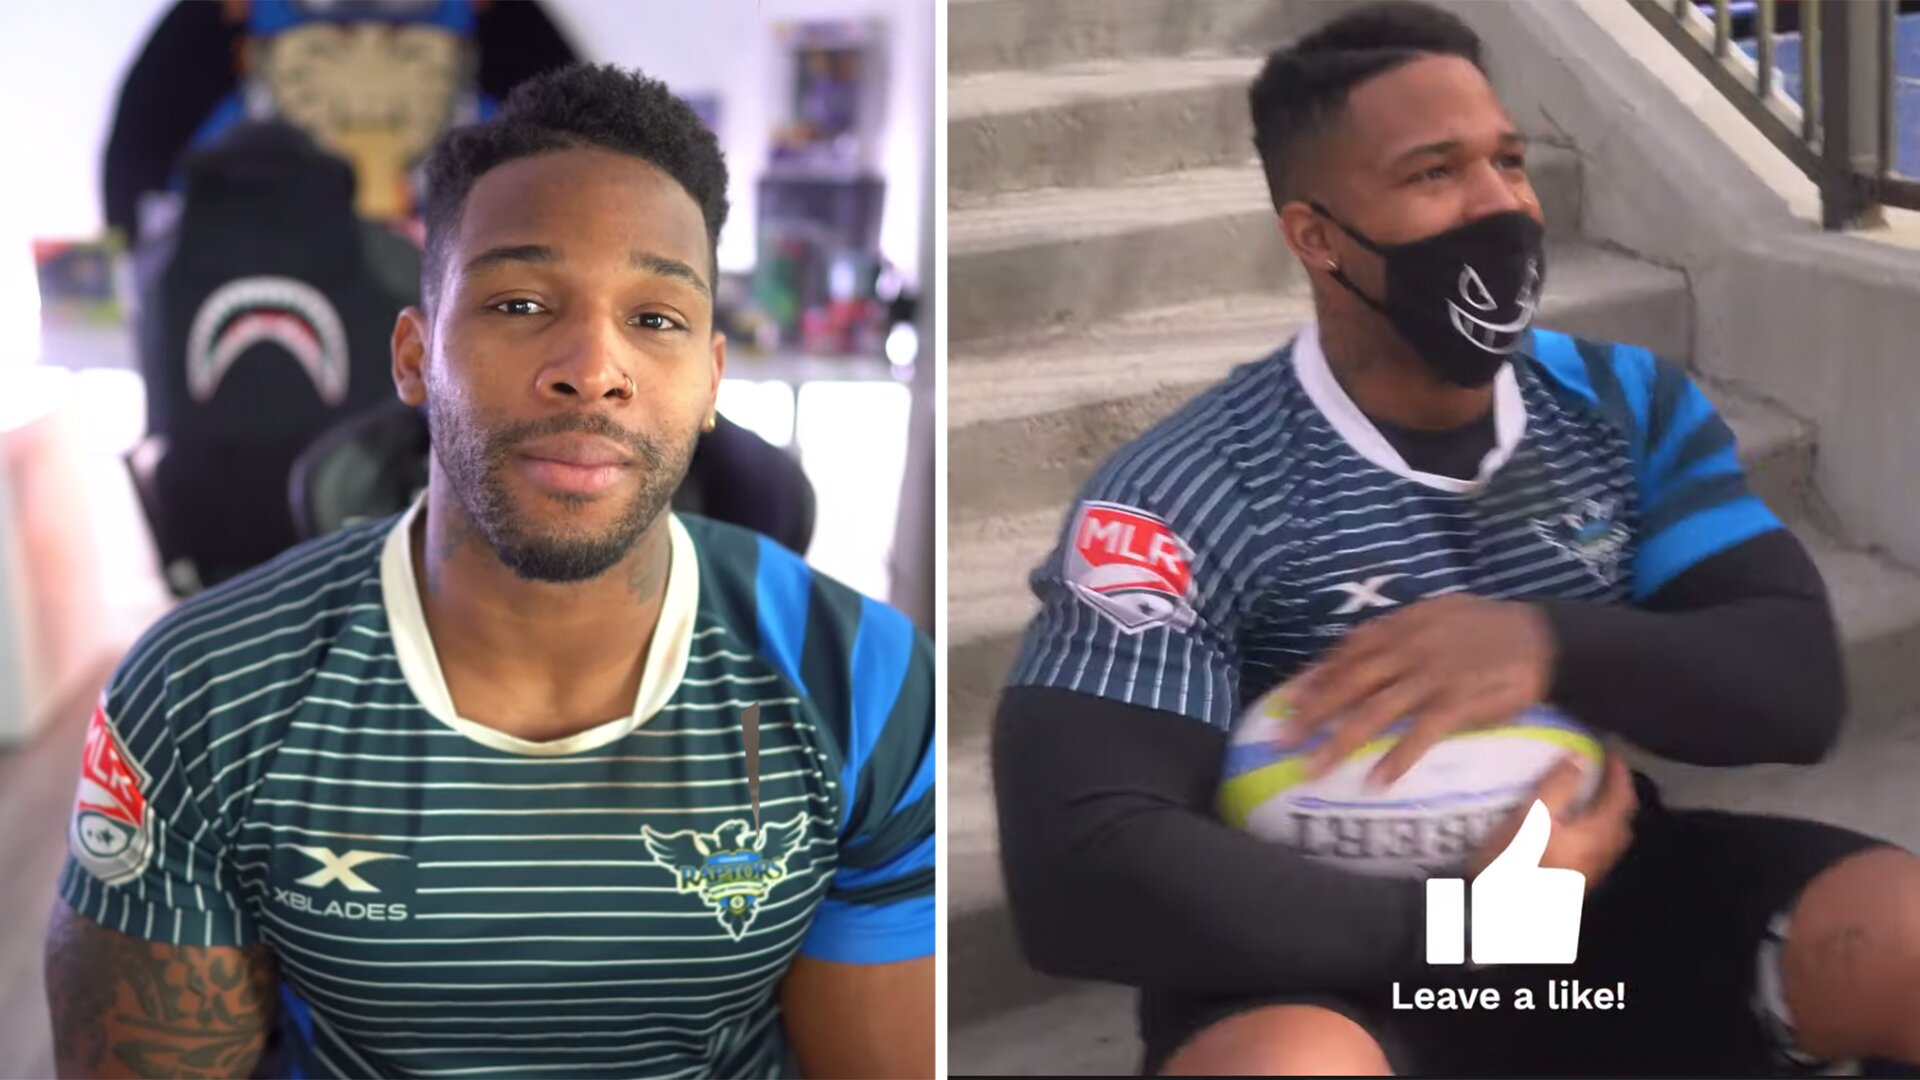 A famous influencer has just documented his journey into Major League Rugby in America - Emotional footage